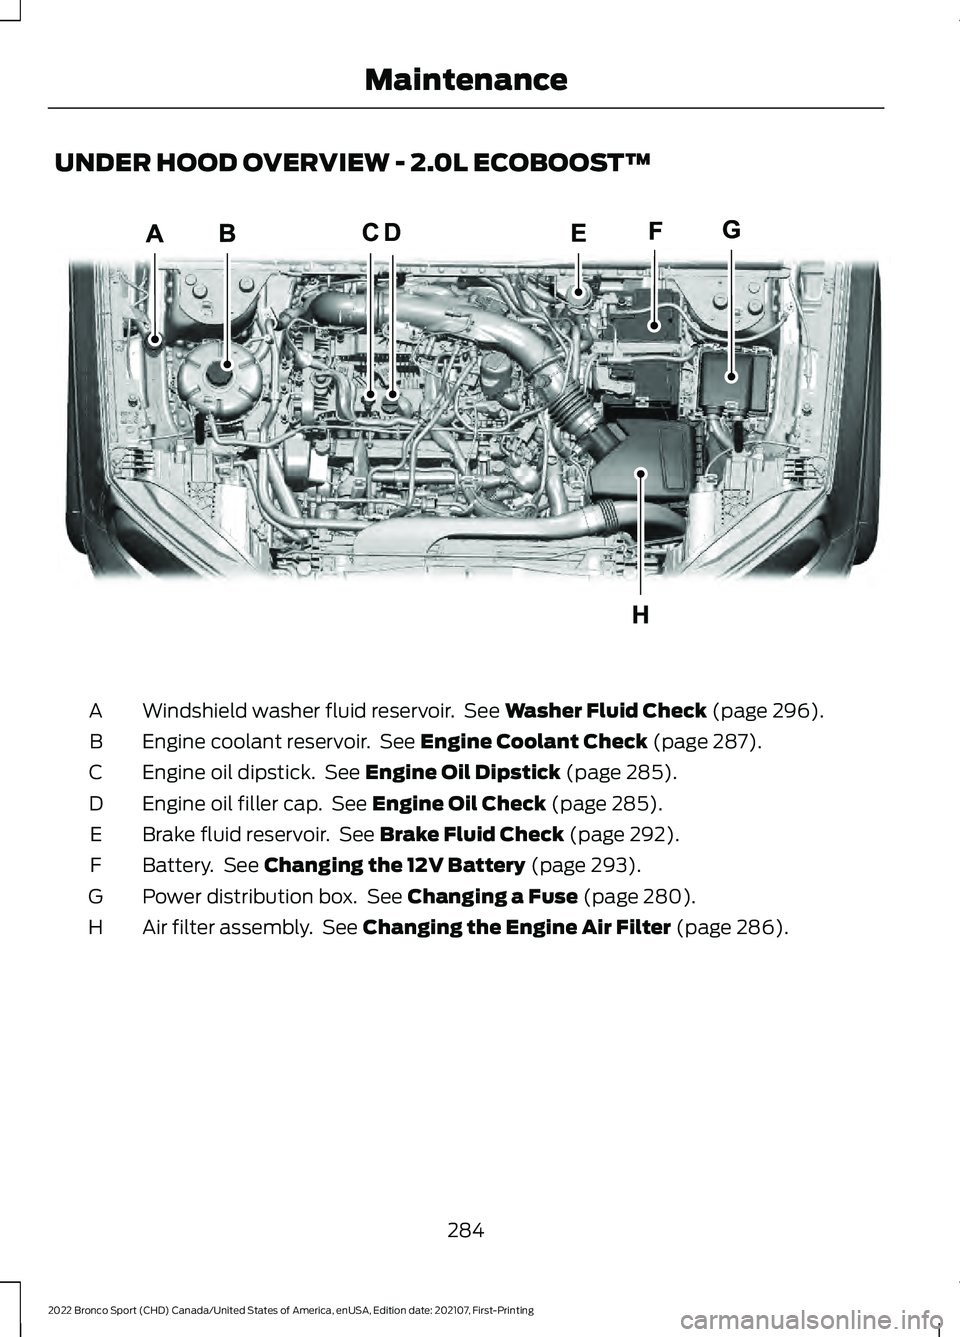 FORD BRONCO SPORT 2022  Owners Manual UNDER HOOD OVERVIEW - 2.0L ECOBOOST™
Windshield washer fluid reservoir.  See Washer Fluid Check (page 296).
A
Engine coolant reservoir.  See 
Engine Coolant Check (page 287).
B
Engine oil dipstick. 